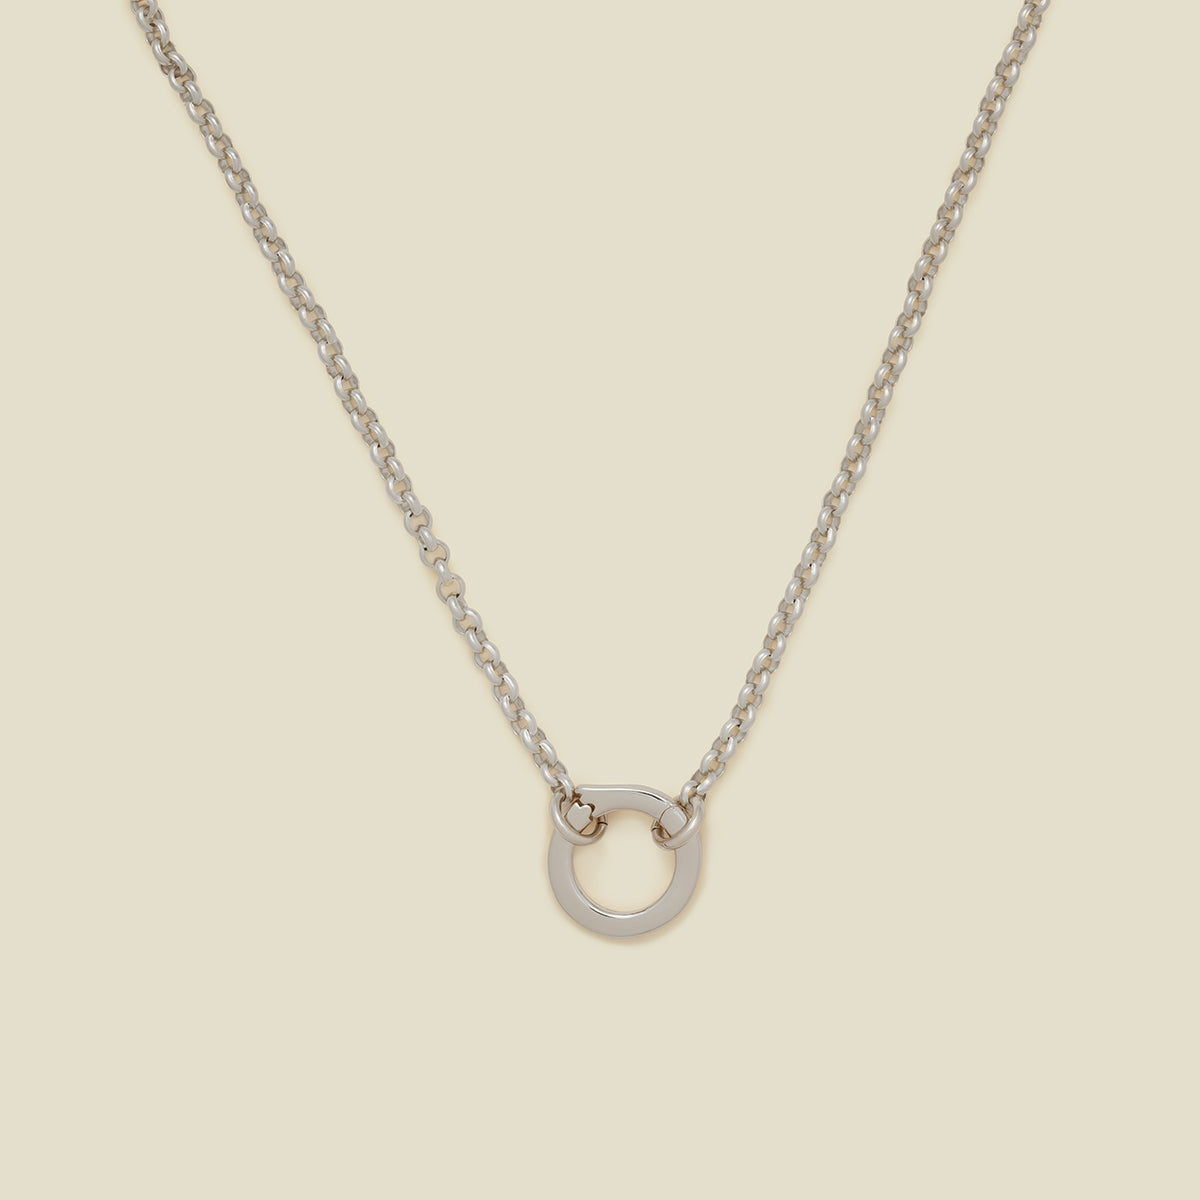 Rolo Charm Necklace Silver / With Link Lock Necklace